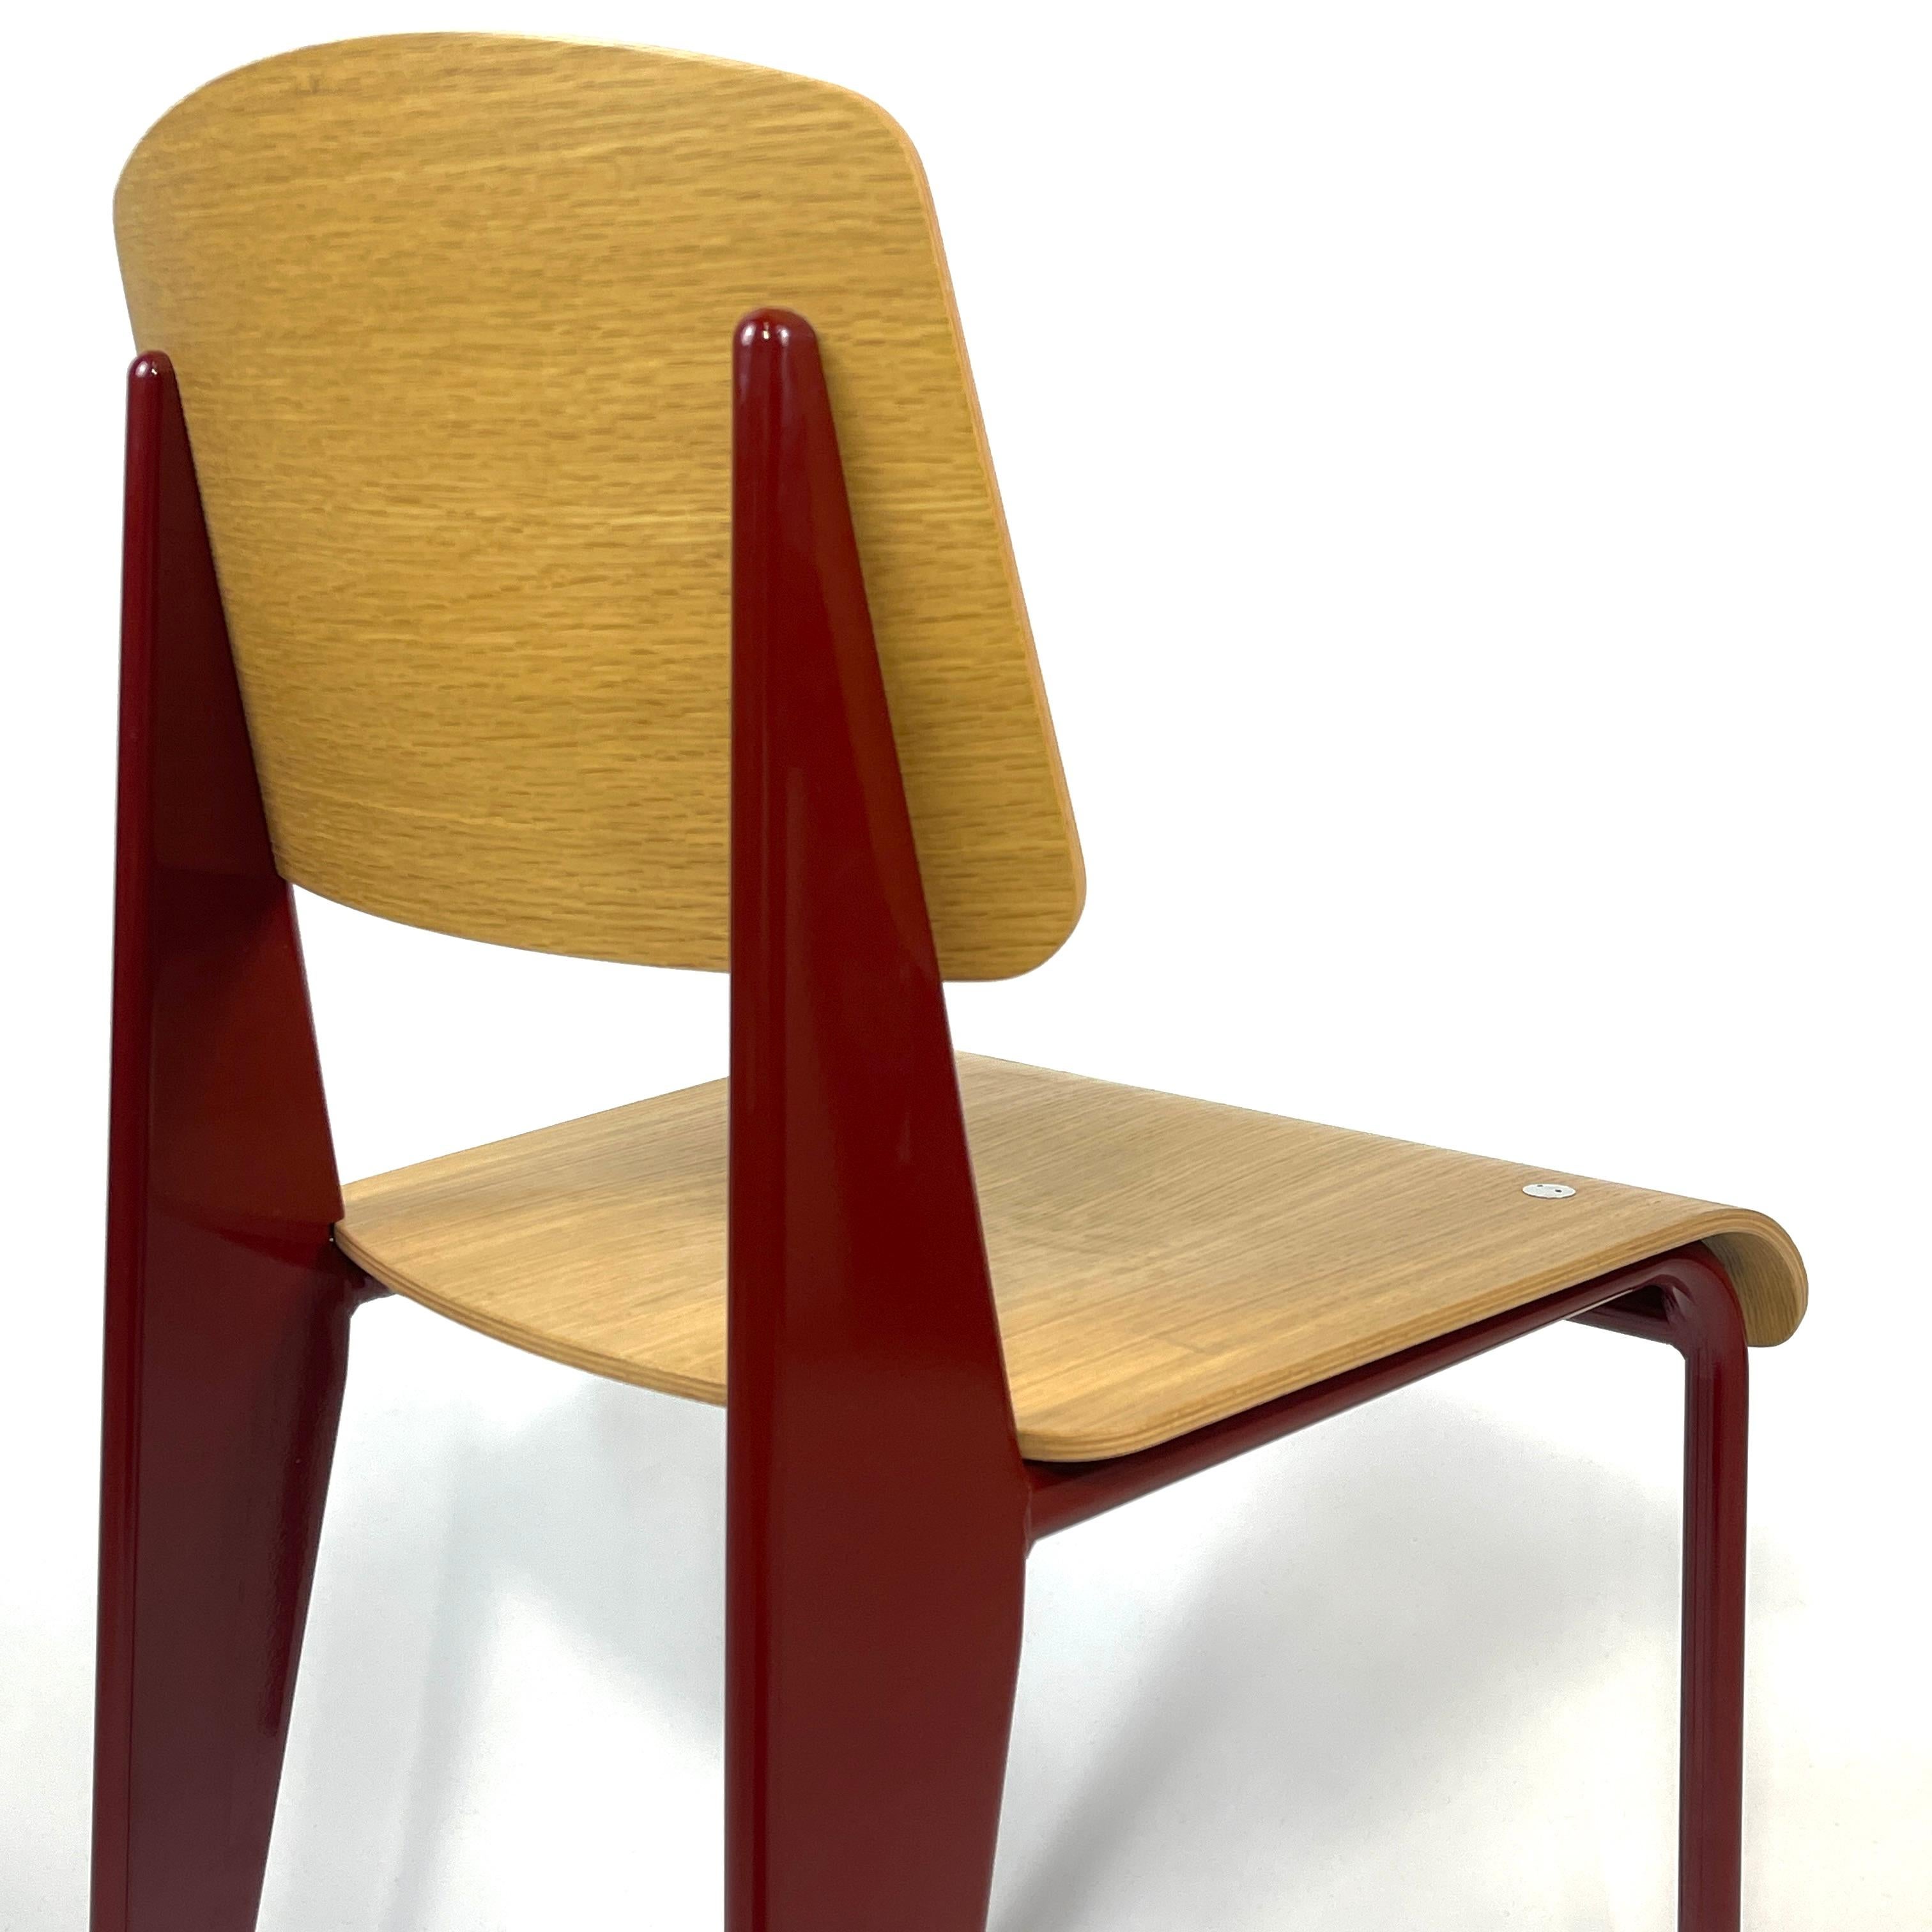 Powder-Coated Jean Prouvé Dining Chair Japanese Red Steel and Natural Oak by Vitra (3 avail)